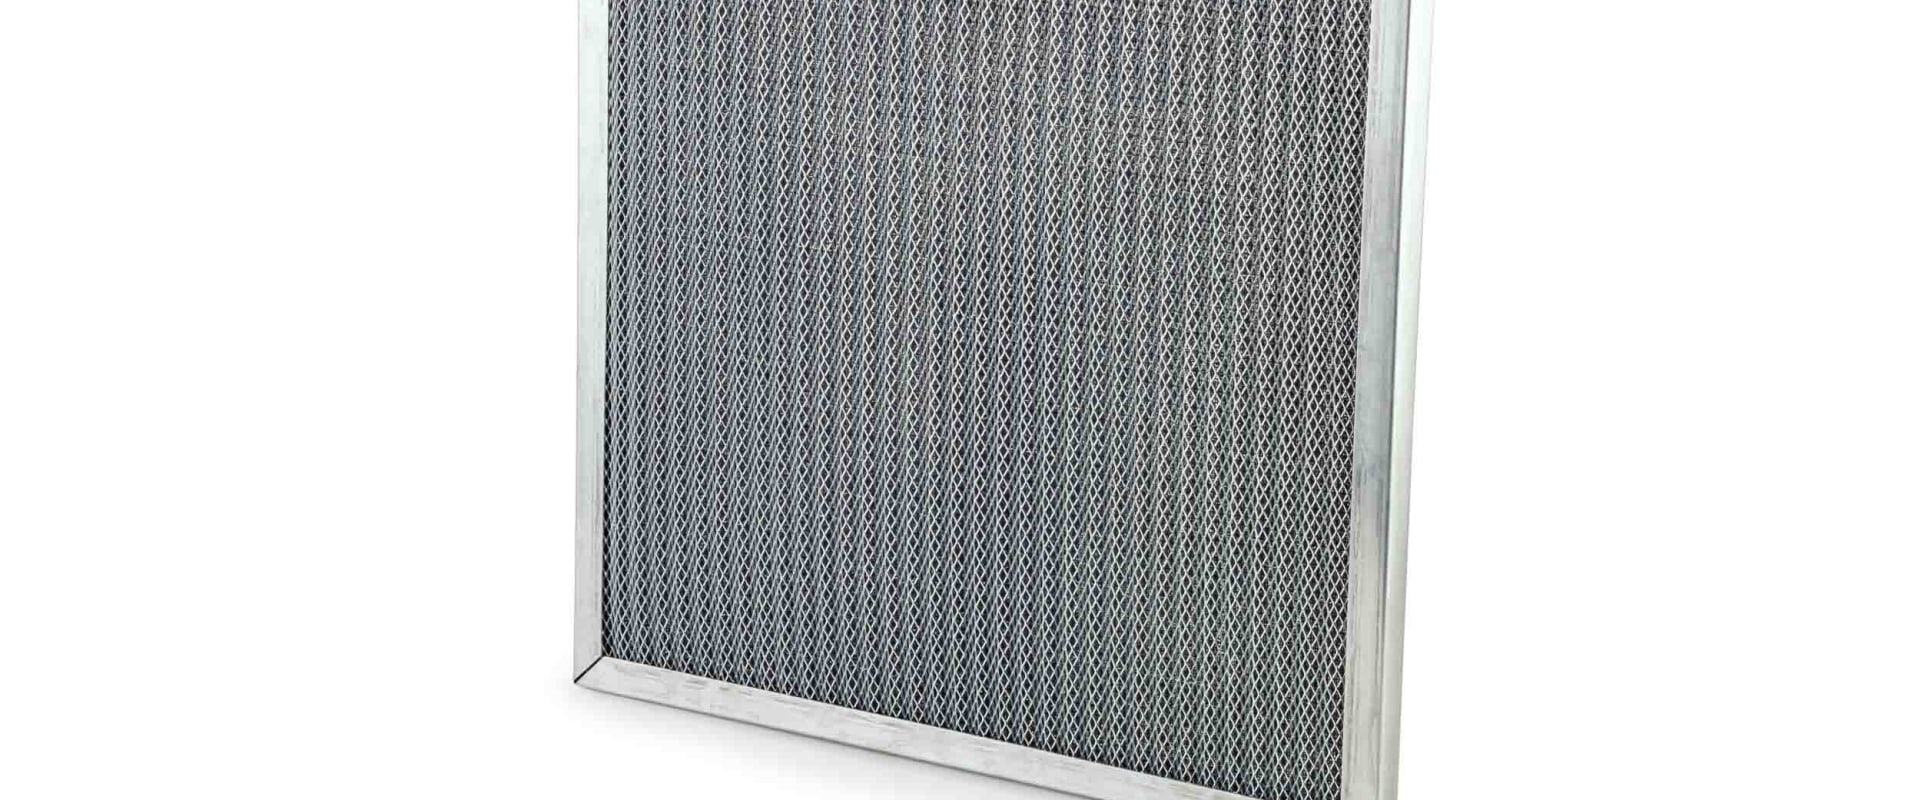 Are electrostatic air filters better than regular air filters?